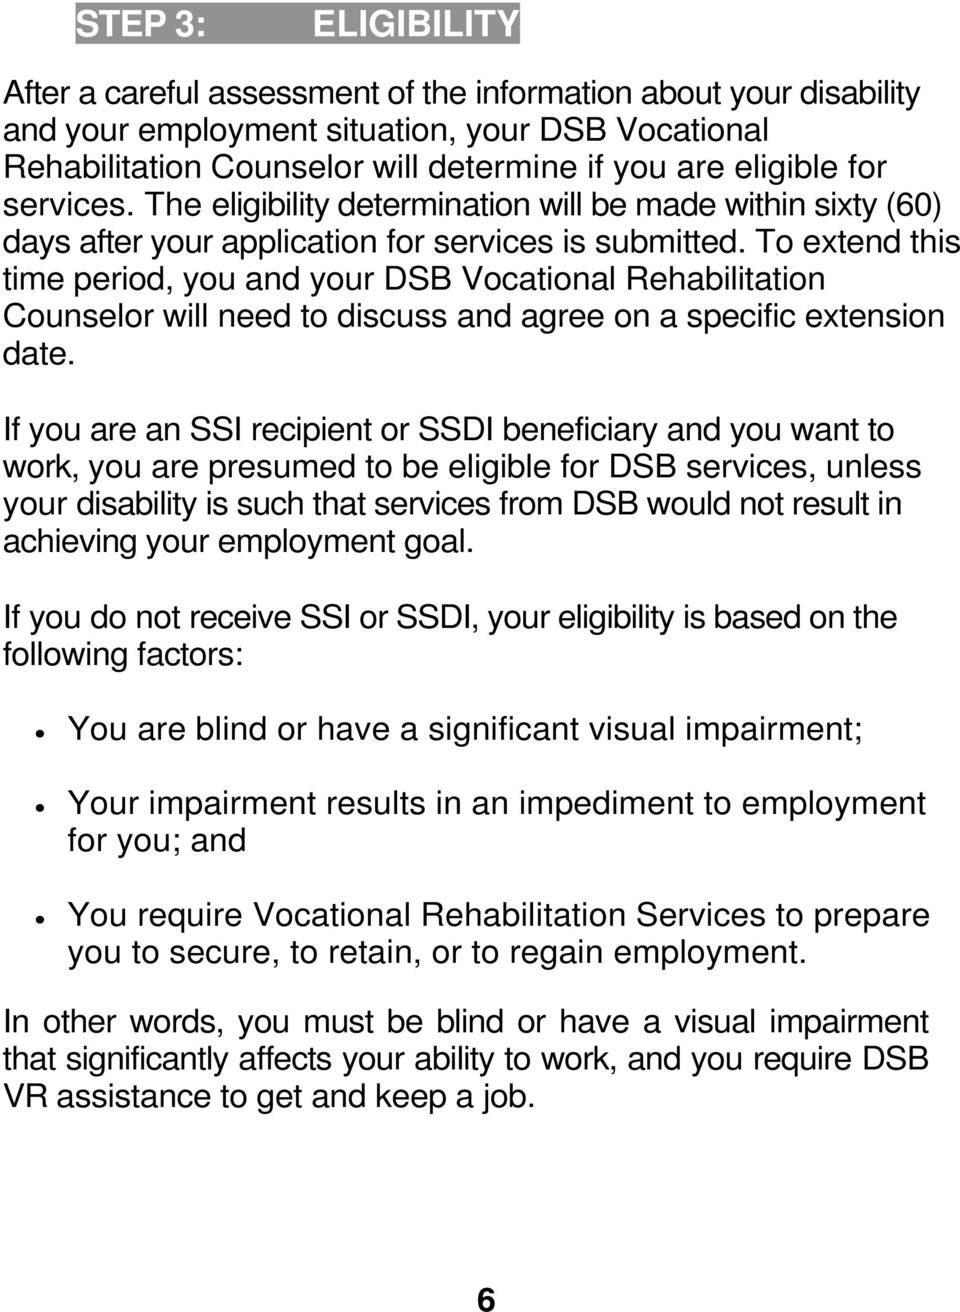 To extend this time period, you and your DSB Vocational Rehabilitation Counselor will need to discuss and agree on a specific extension date.